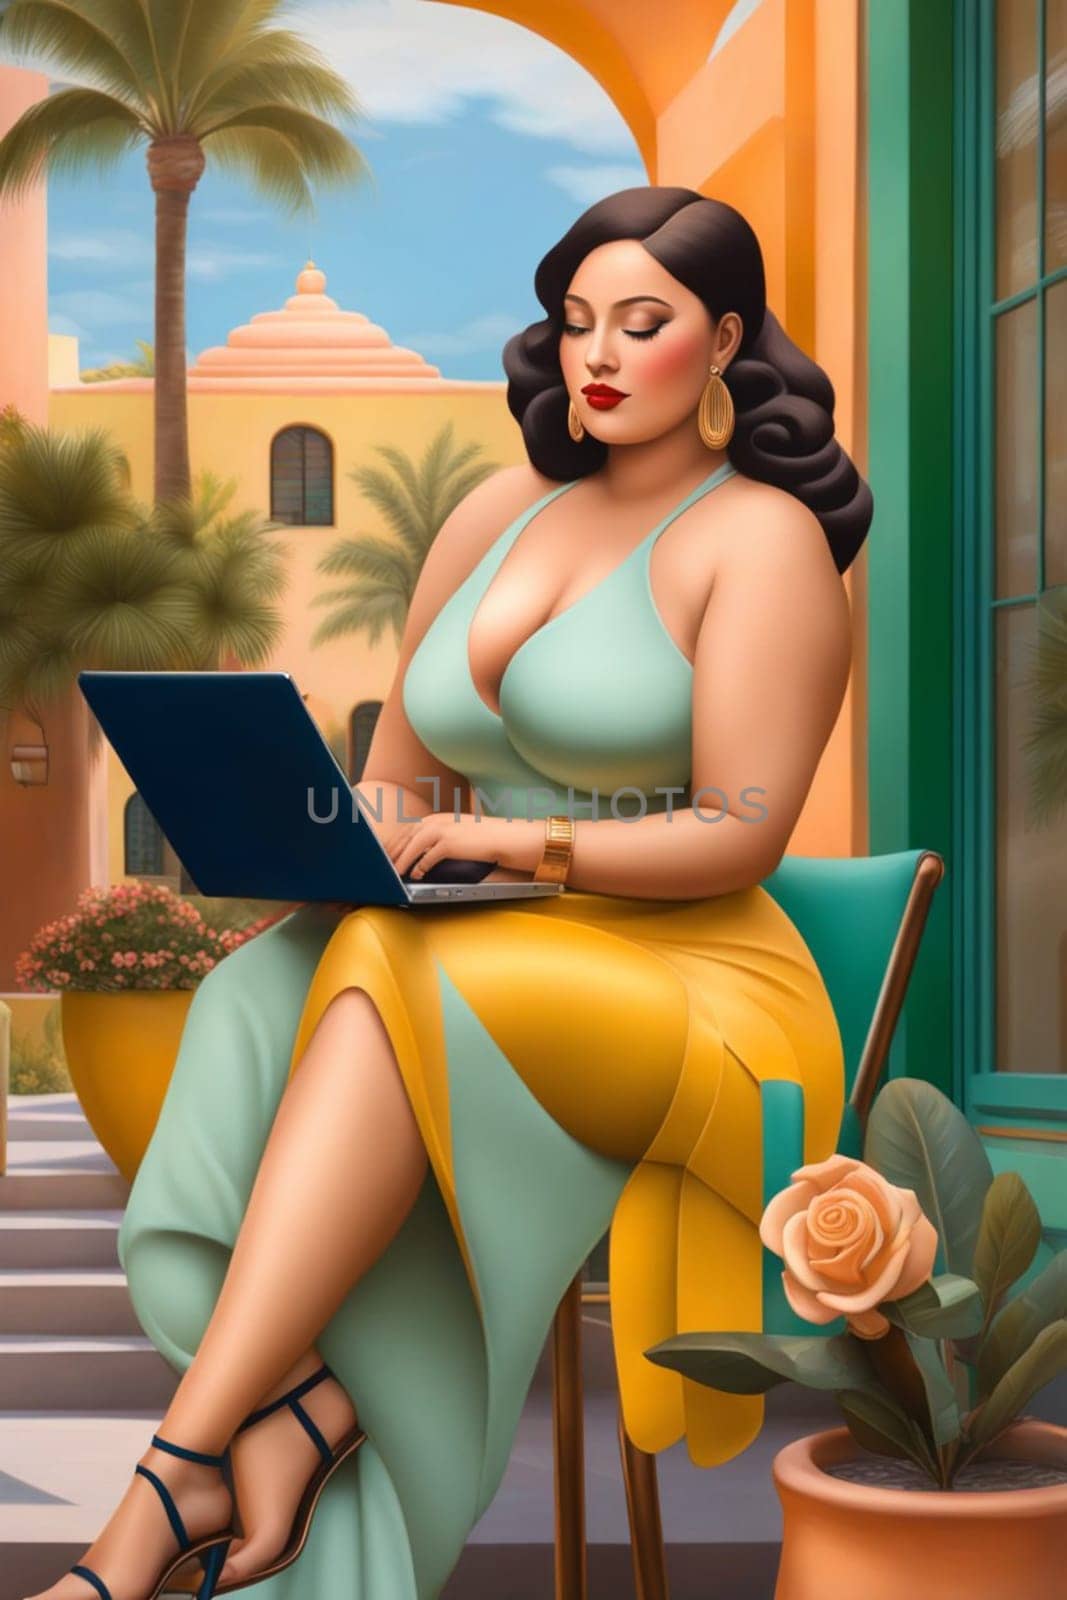 iilustration poster of voluptous female model remote working outdoors in a yard in caribbean villa by verbano